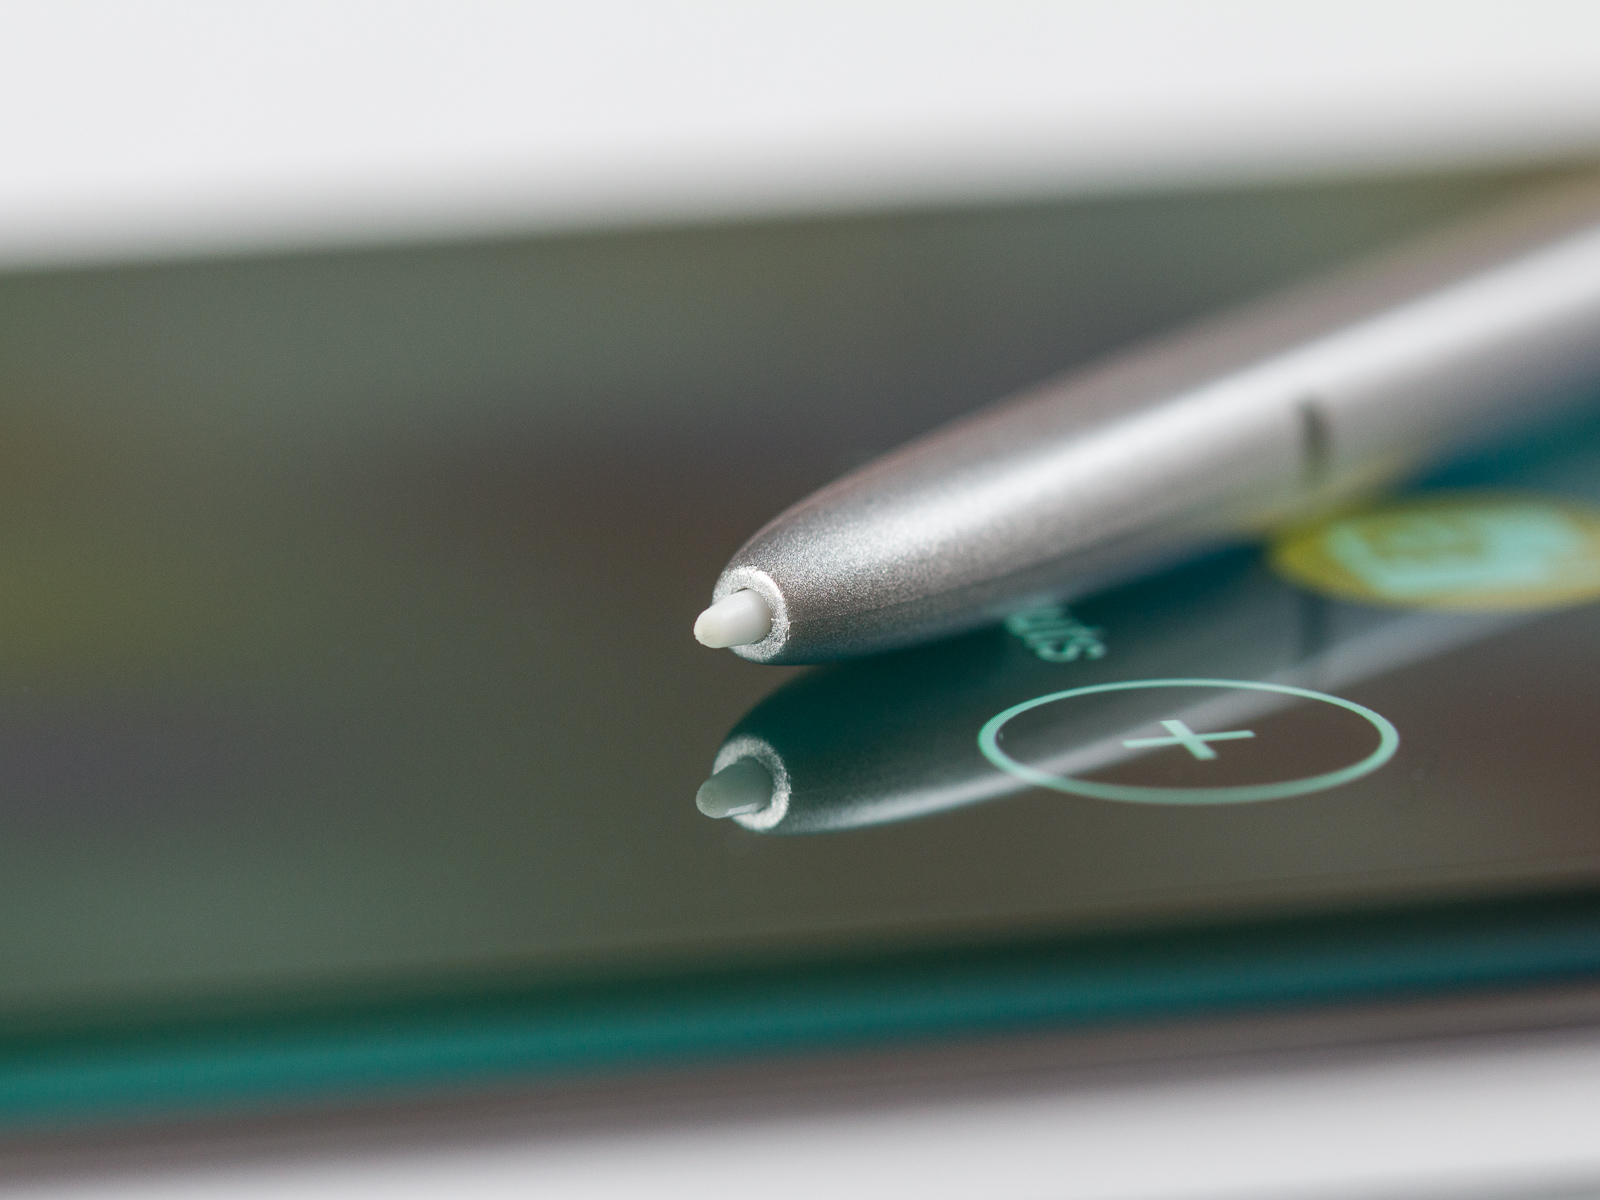 4. An S-Pen for the Galaxy S8 Plus?